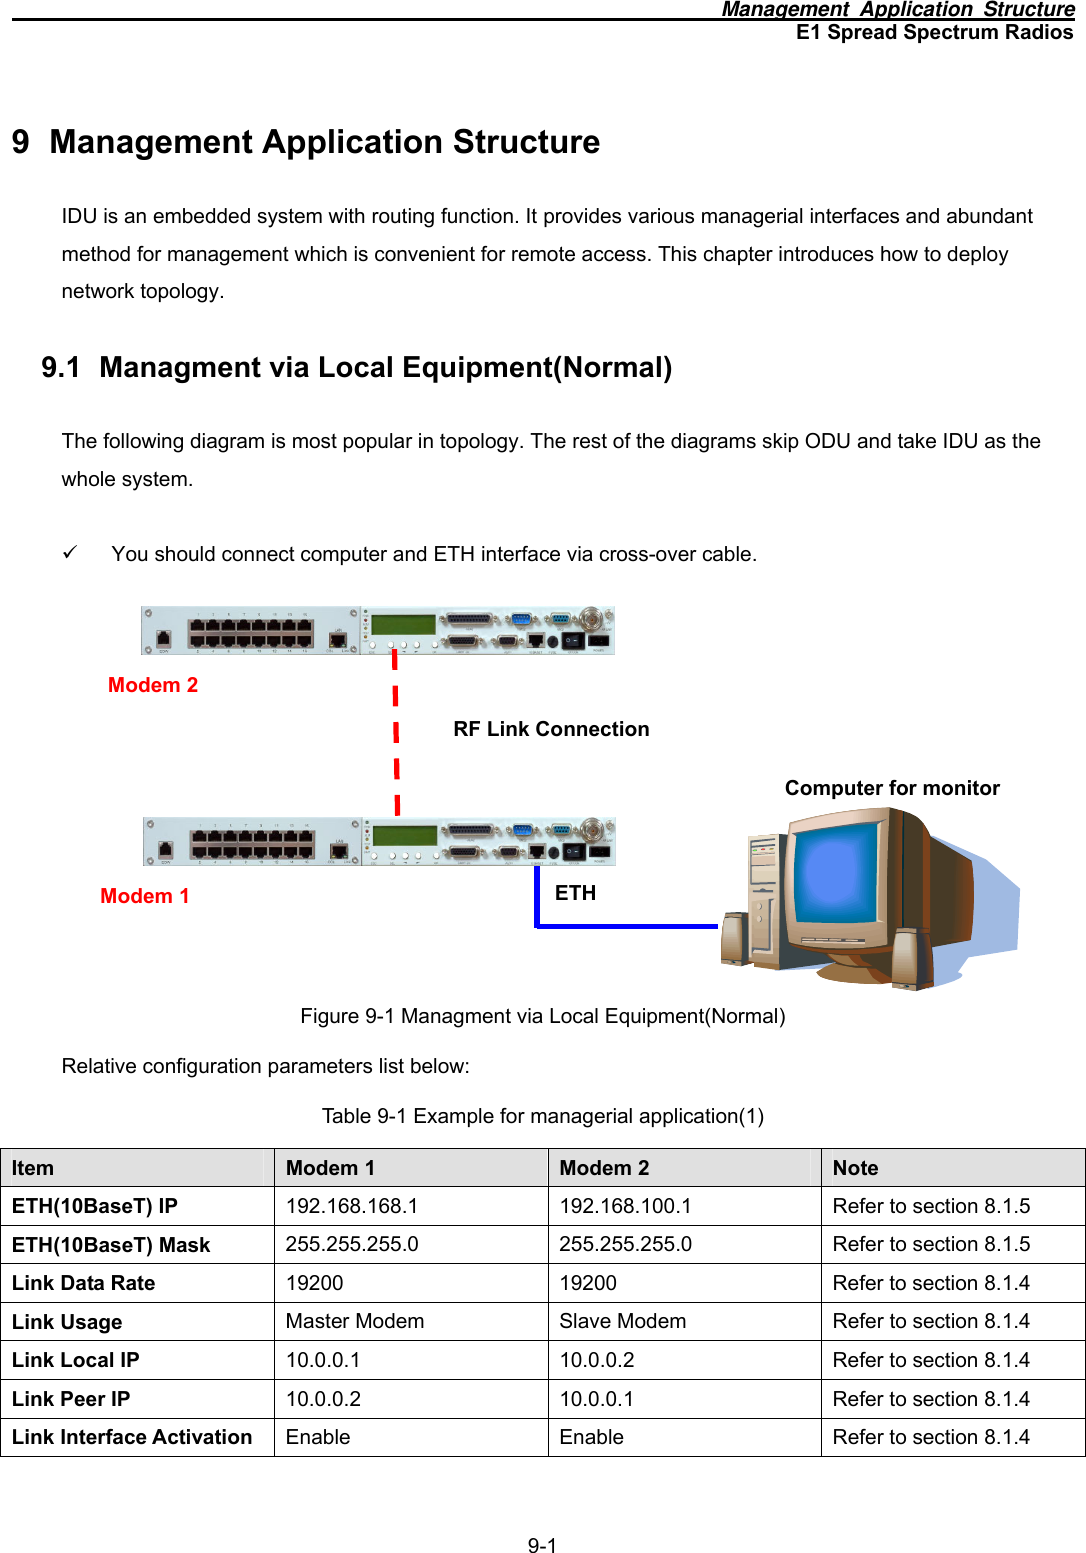                                                                     Management Application Structure E1 Spread Spectrum Radios 9-1 9  Management Application Structure IDU is an embedded system with routing function. It provides various managerial interfaces and abundant method for management which is convenient for remote access. This chapter introduces how to deploy network topology. 9.1  Managment via Local Equipment(Normal) The following diagram is most popular in topology. The rest of the diagrams skip ODU and take IDU as the whole system.    9  You should connect computer and ETH interface via cross-over cable.            Figure 9-1 Managment via Local Equipment(Normal) Relative configuration parameters list below: Table 9-1 Example for managerial application(1) Item  Modem 1  Modem 2  Note ETH(10BaseT) IP  192.168.168.1 192.168.100.1 Refer to section 8.1.5 ETH(10BaseT) Mask  255.255.255.0 255.255.255.0 Refer to section 8.1.5 Link Data Rate  19200  19200  Refer to section 8.1.4 Link Usage  Master Modem  Slave Modem  Refer to section 8.1.4 Link Local IP  10.0.0.1 10.0.0.2 Refer to section 8.1.4 Link Peer IP  10.0.0.2 10.0.0.1 Refer to section 8.1.4 Link Interface Activation  Enable  Enable  Refer to section 8.1.4 ETH RF Link ConnectionComputer for monitor Modem 1 Modem 2 